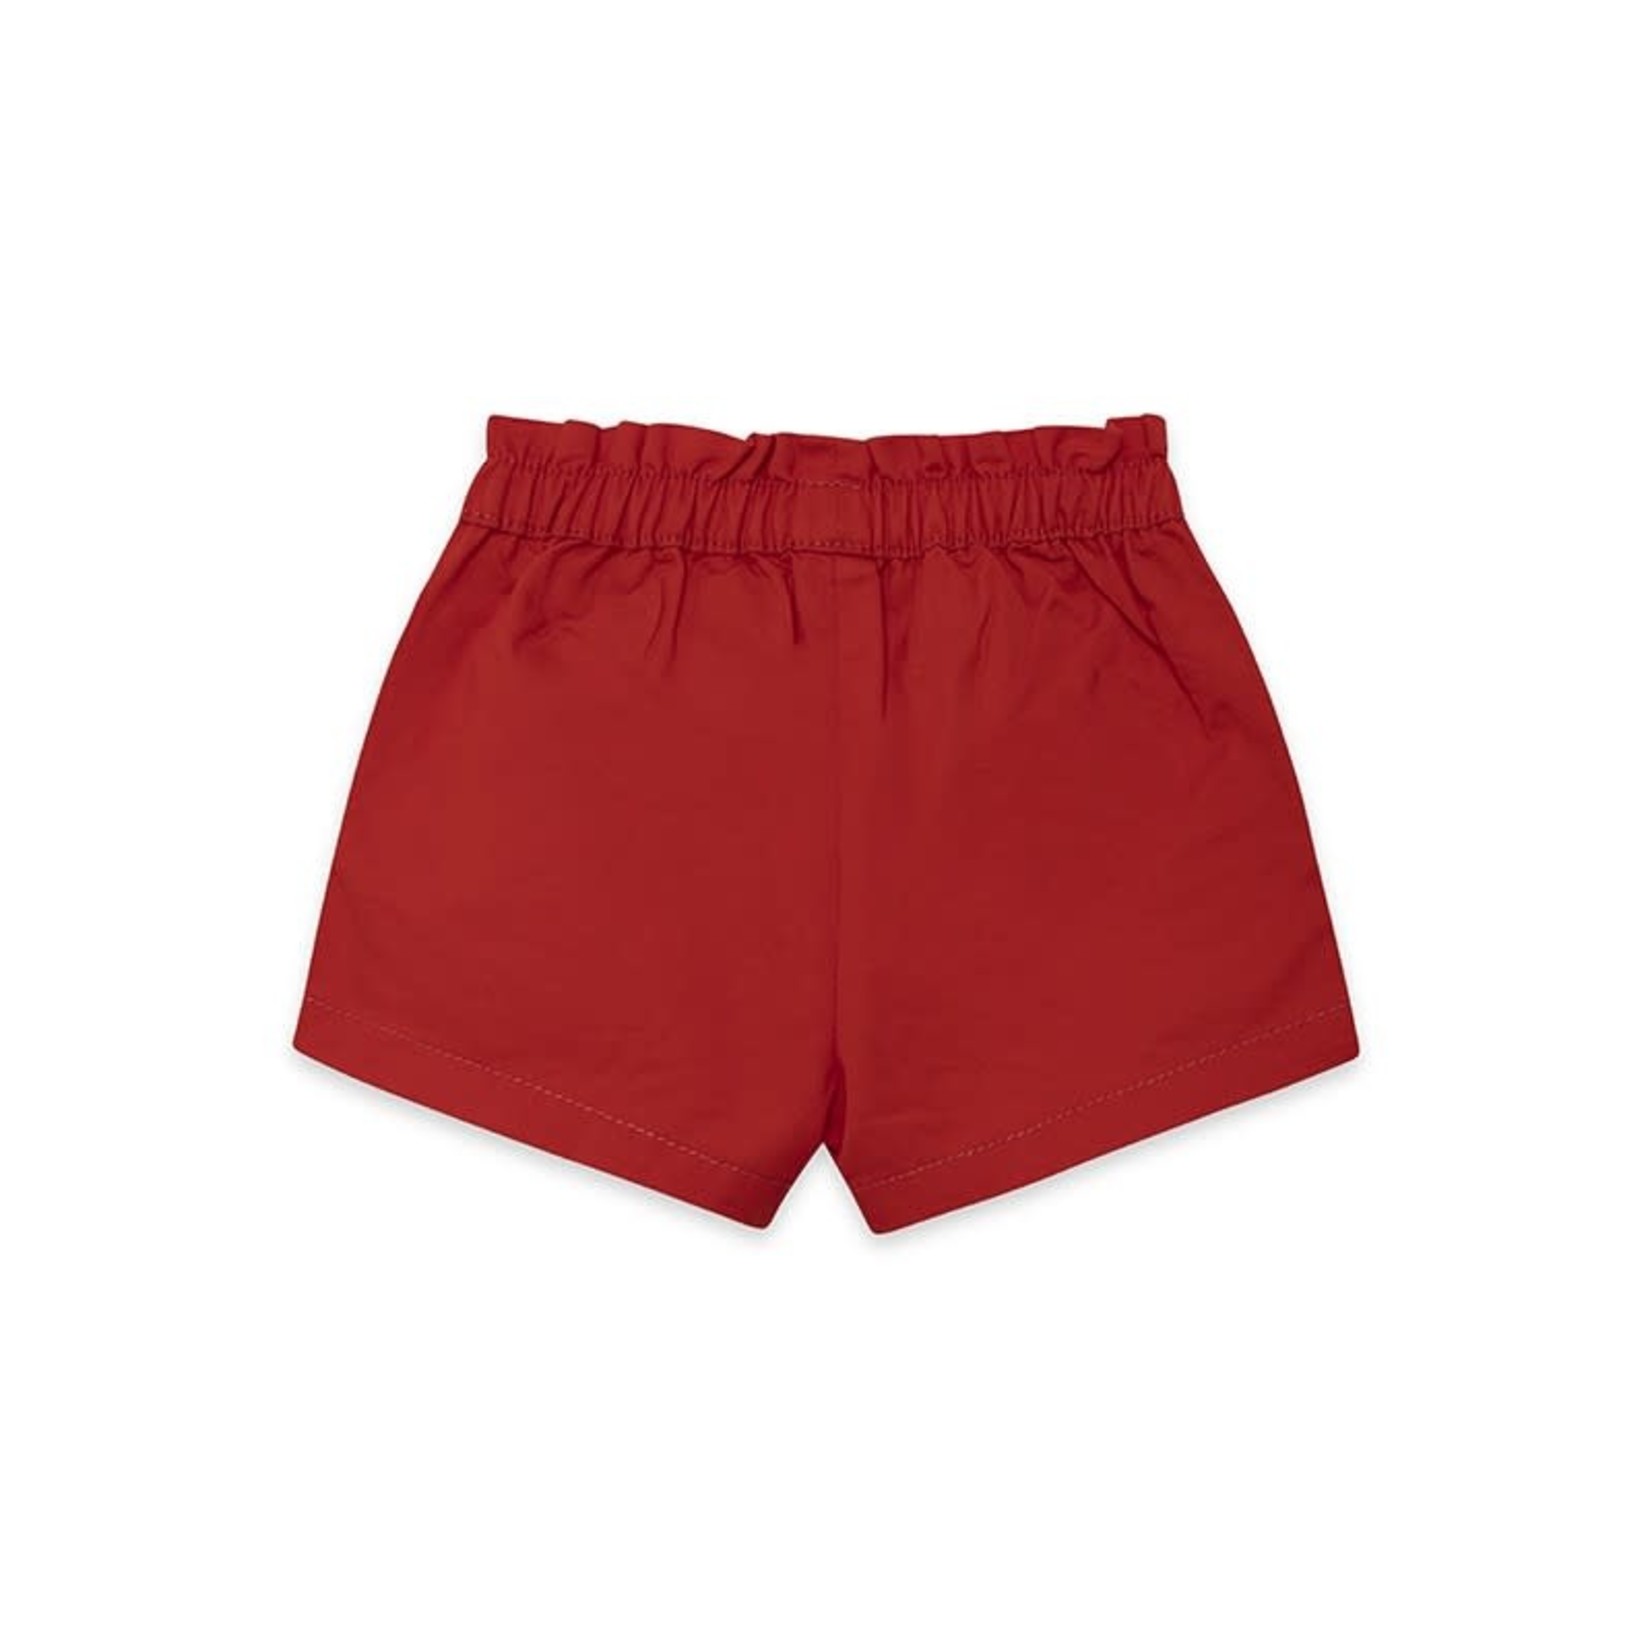 https://cdn.shoplightspeed.com/shops/648213/files/42601839/1652x1652x2/tuctuc-tuc-tuc-red-twill-shorts-with-gathers-and-d.jpg